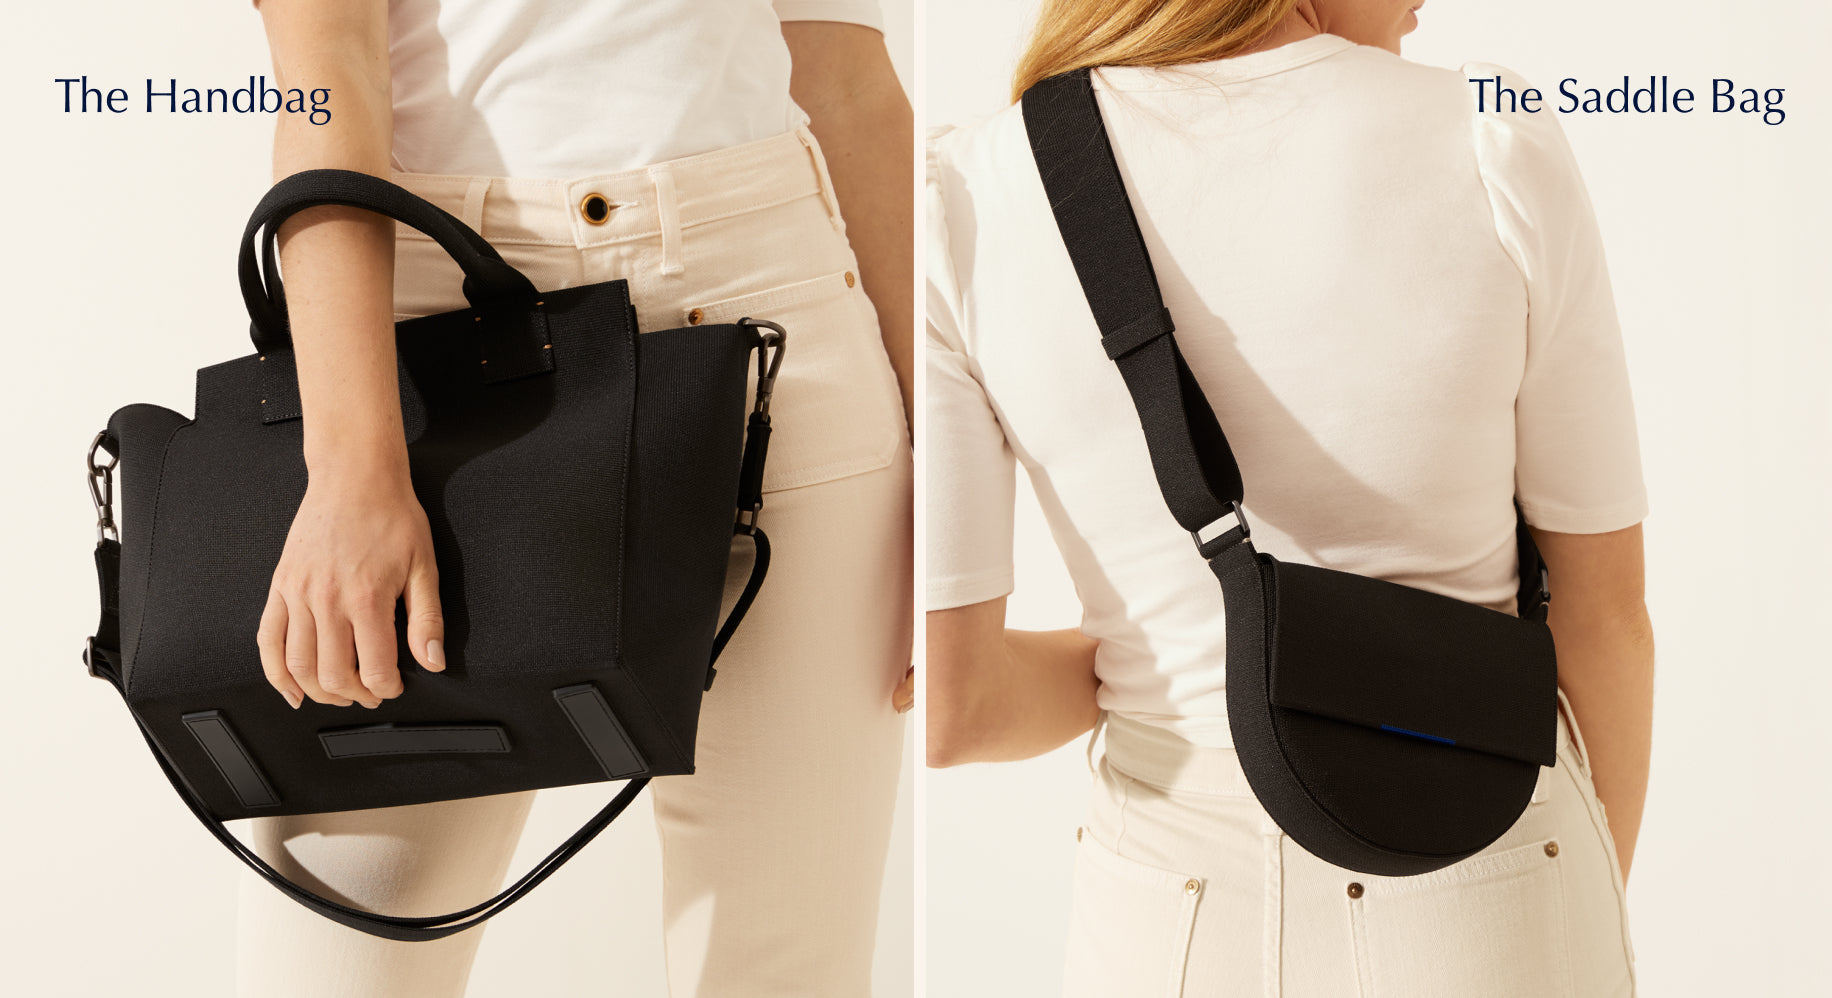 On the left, model holding The Handbag in Total Black. On the right, model wearing The Saddle Bag in Total Black.